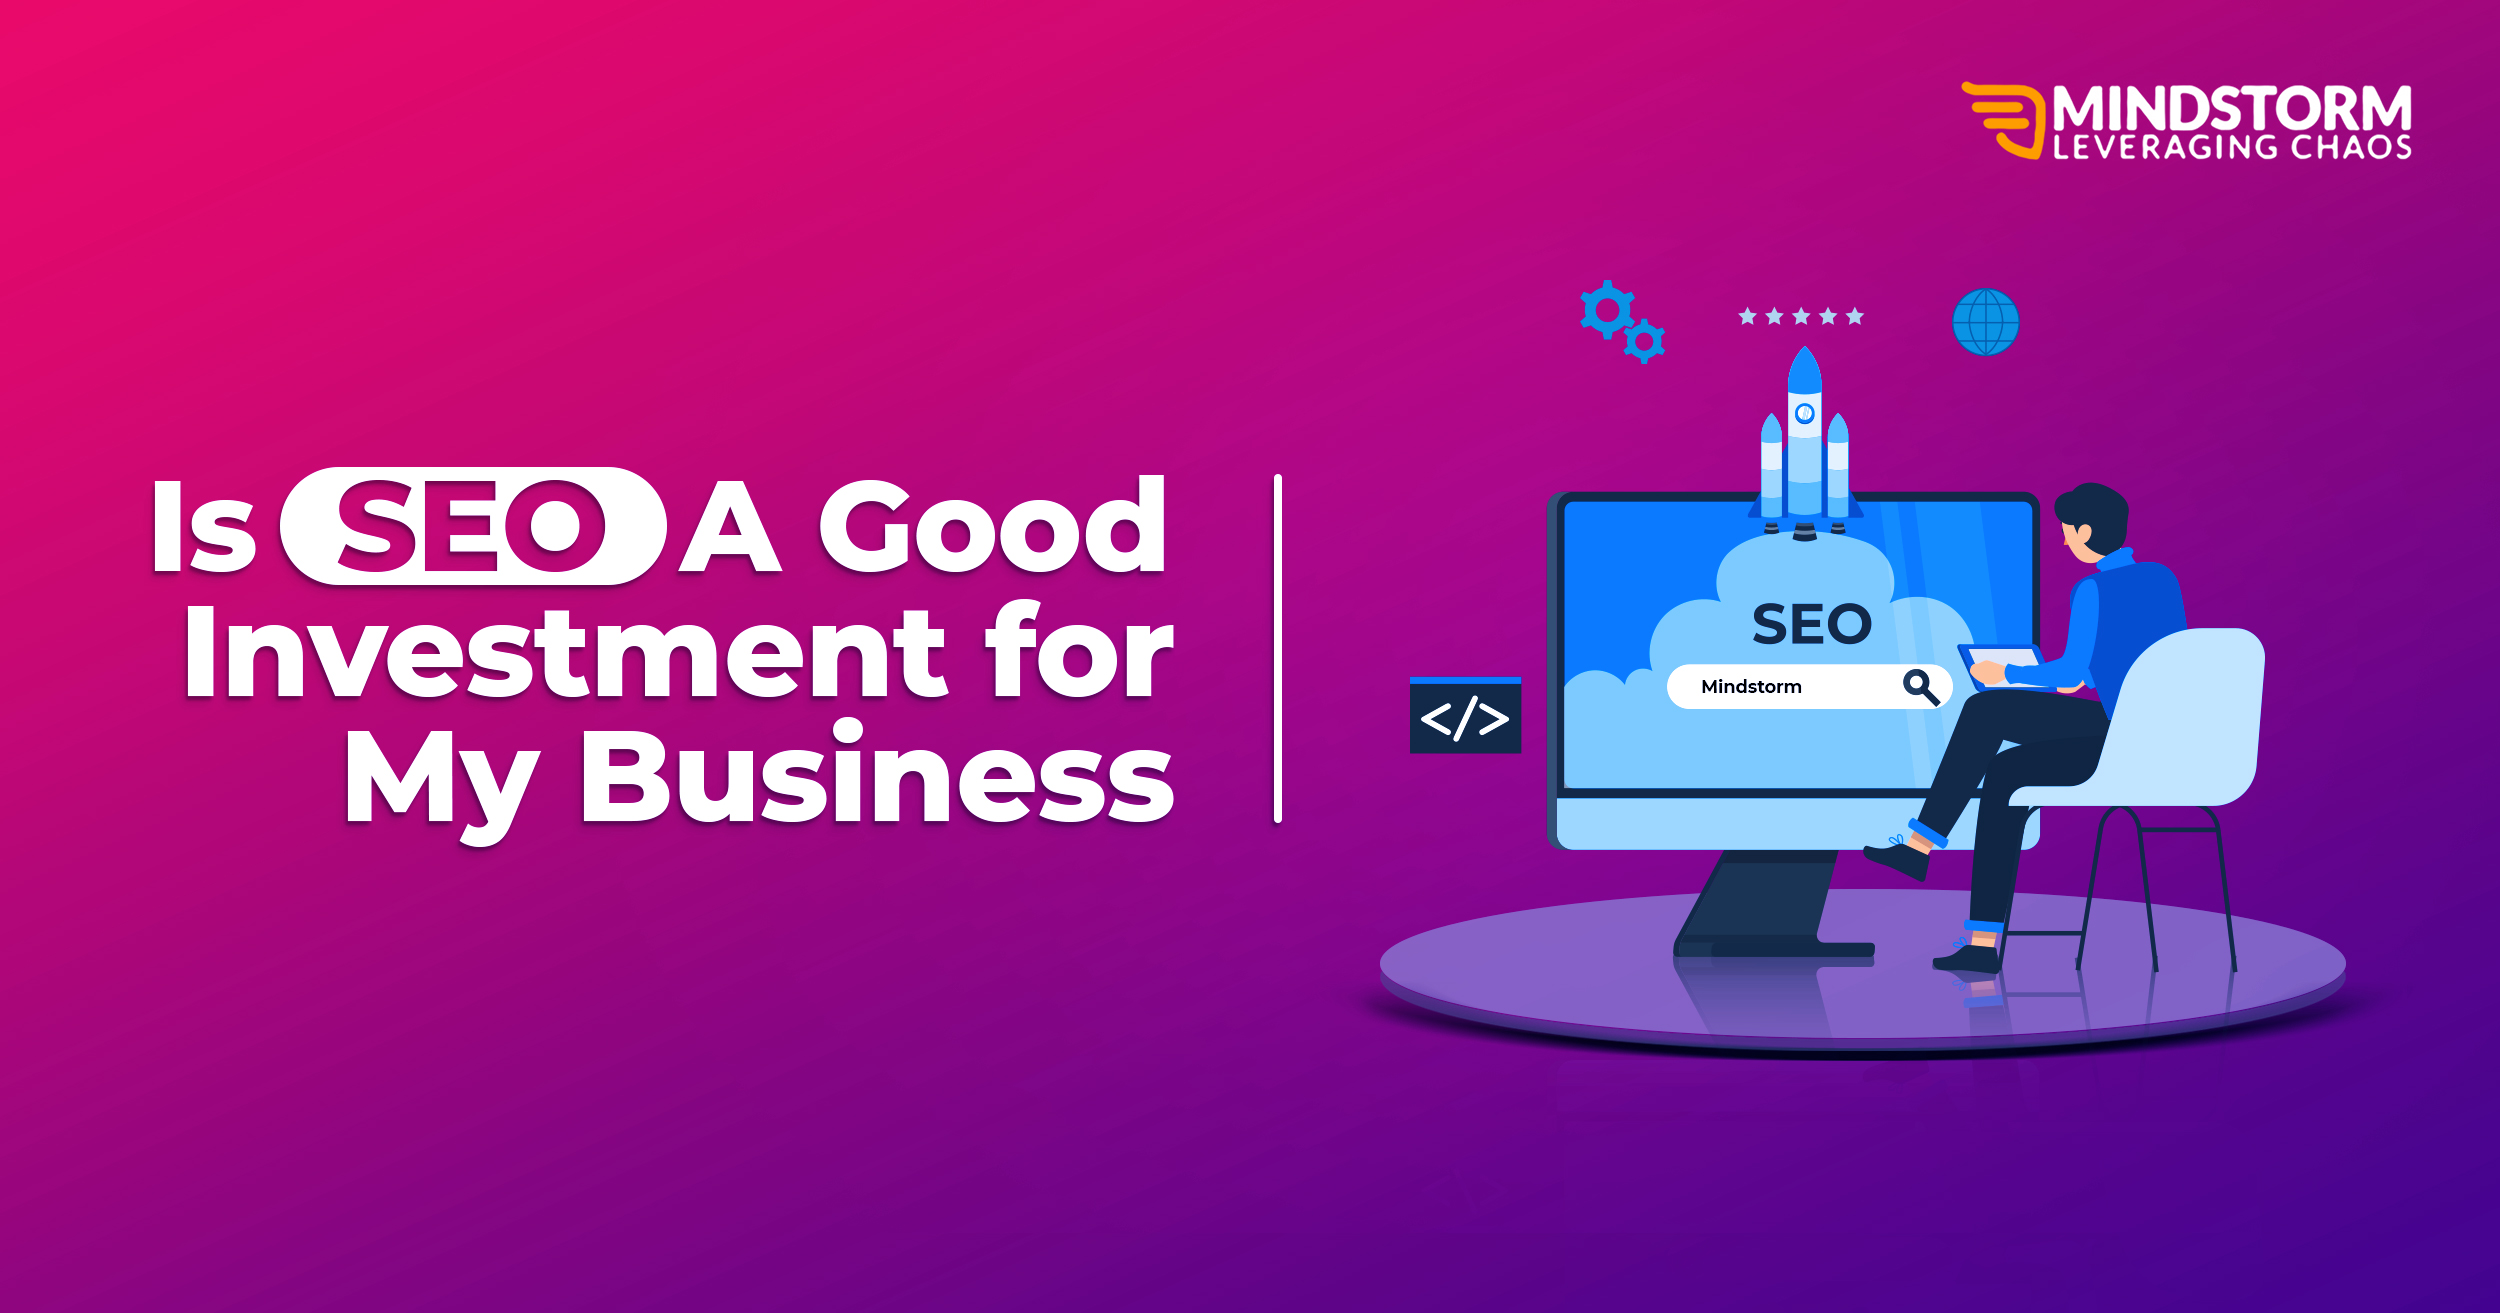 Is SEO A Good Investment for My Business?